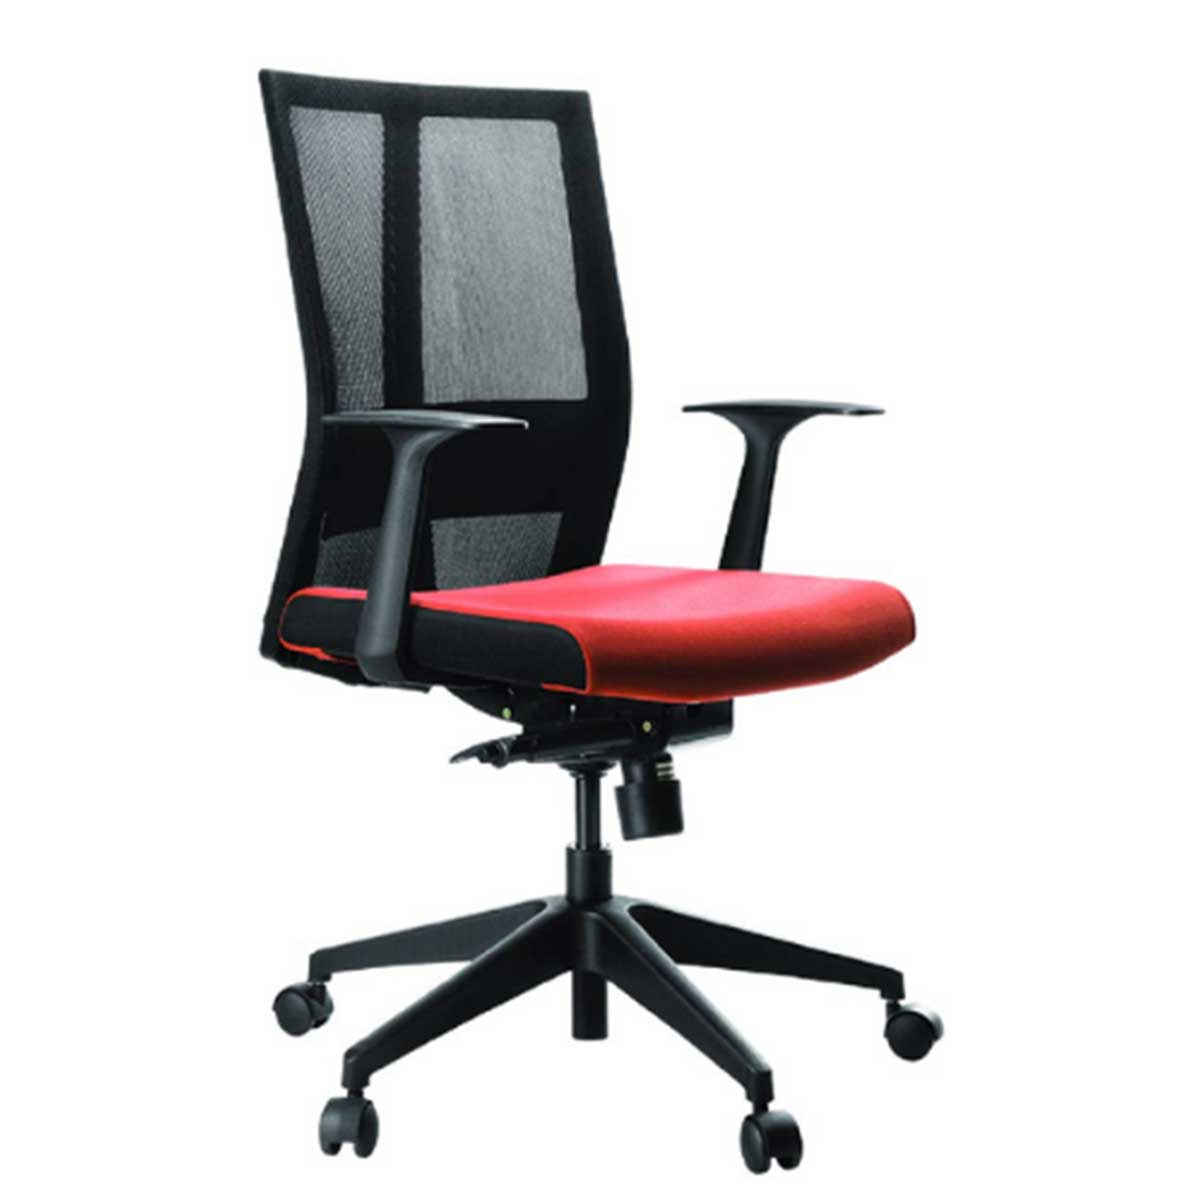 Conference Chair Manufacturers, Suppliers in Manglapuri